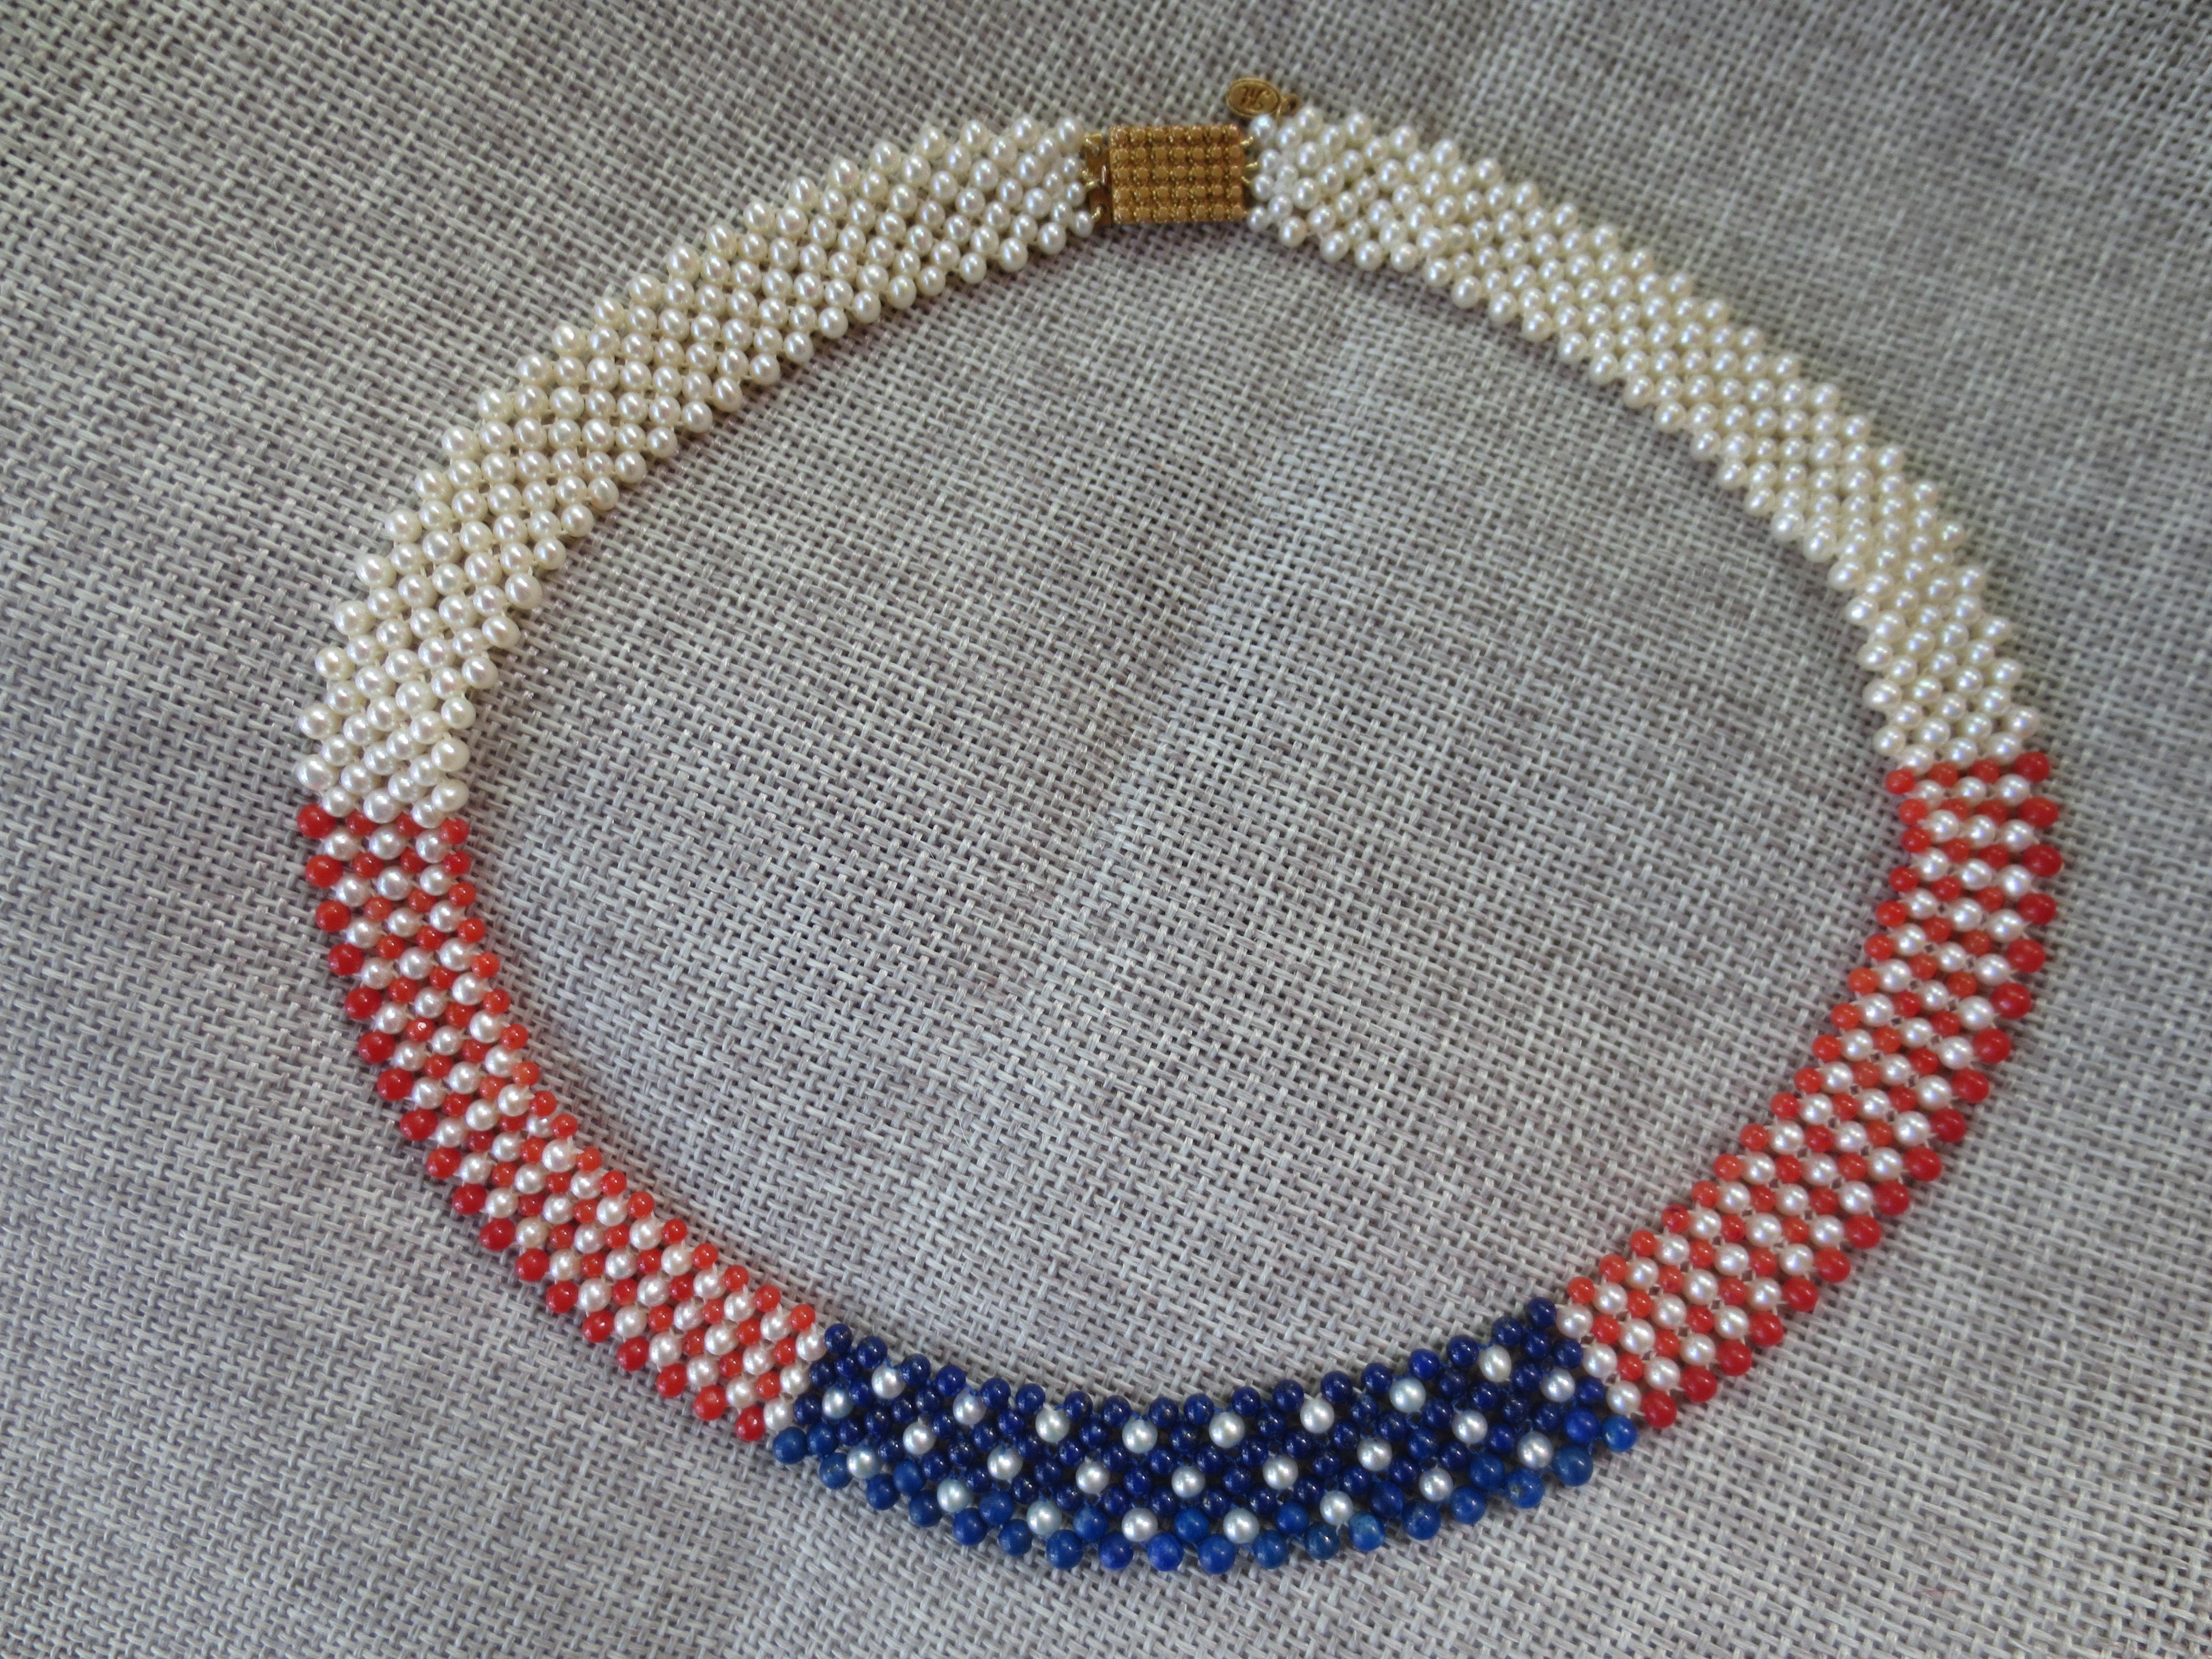 Women's Marina J. American Flag Woven Pearl, Coral, & Lapis Necklace with 14K yellow g.